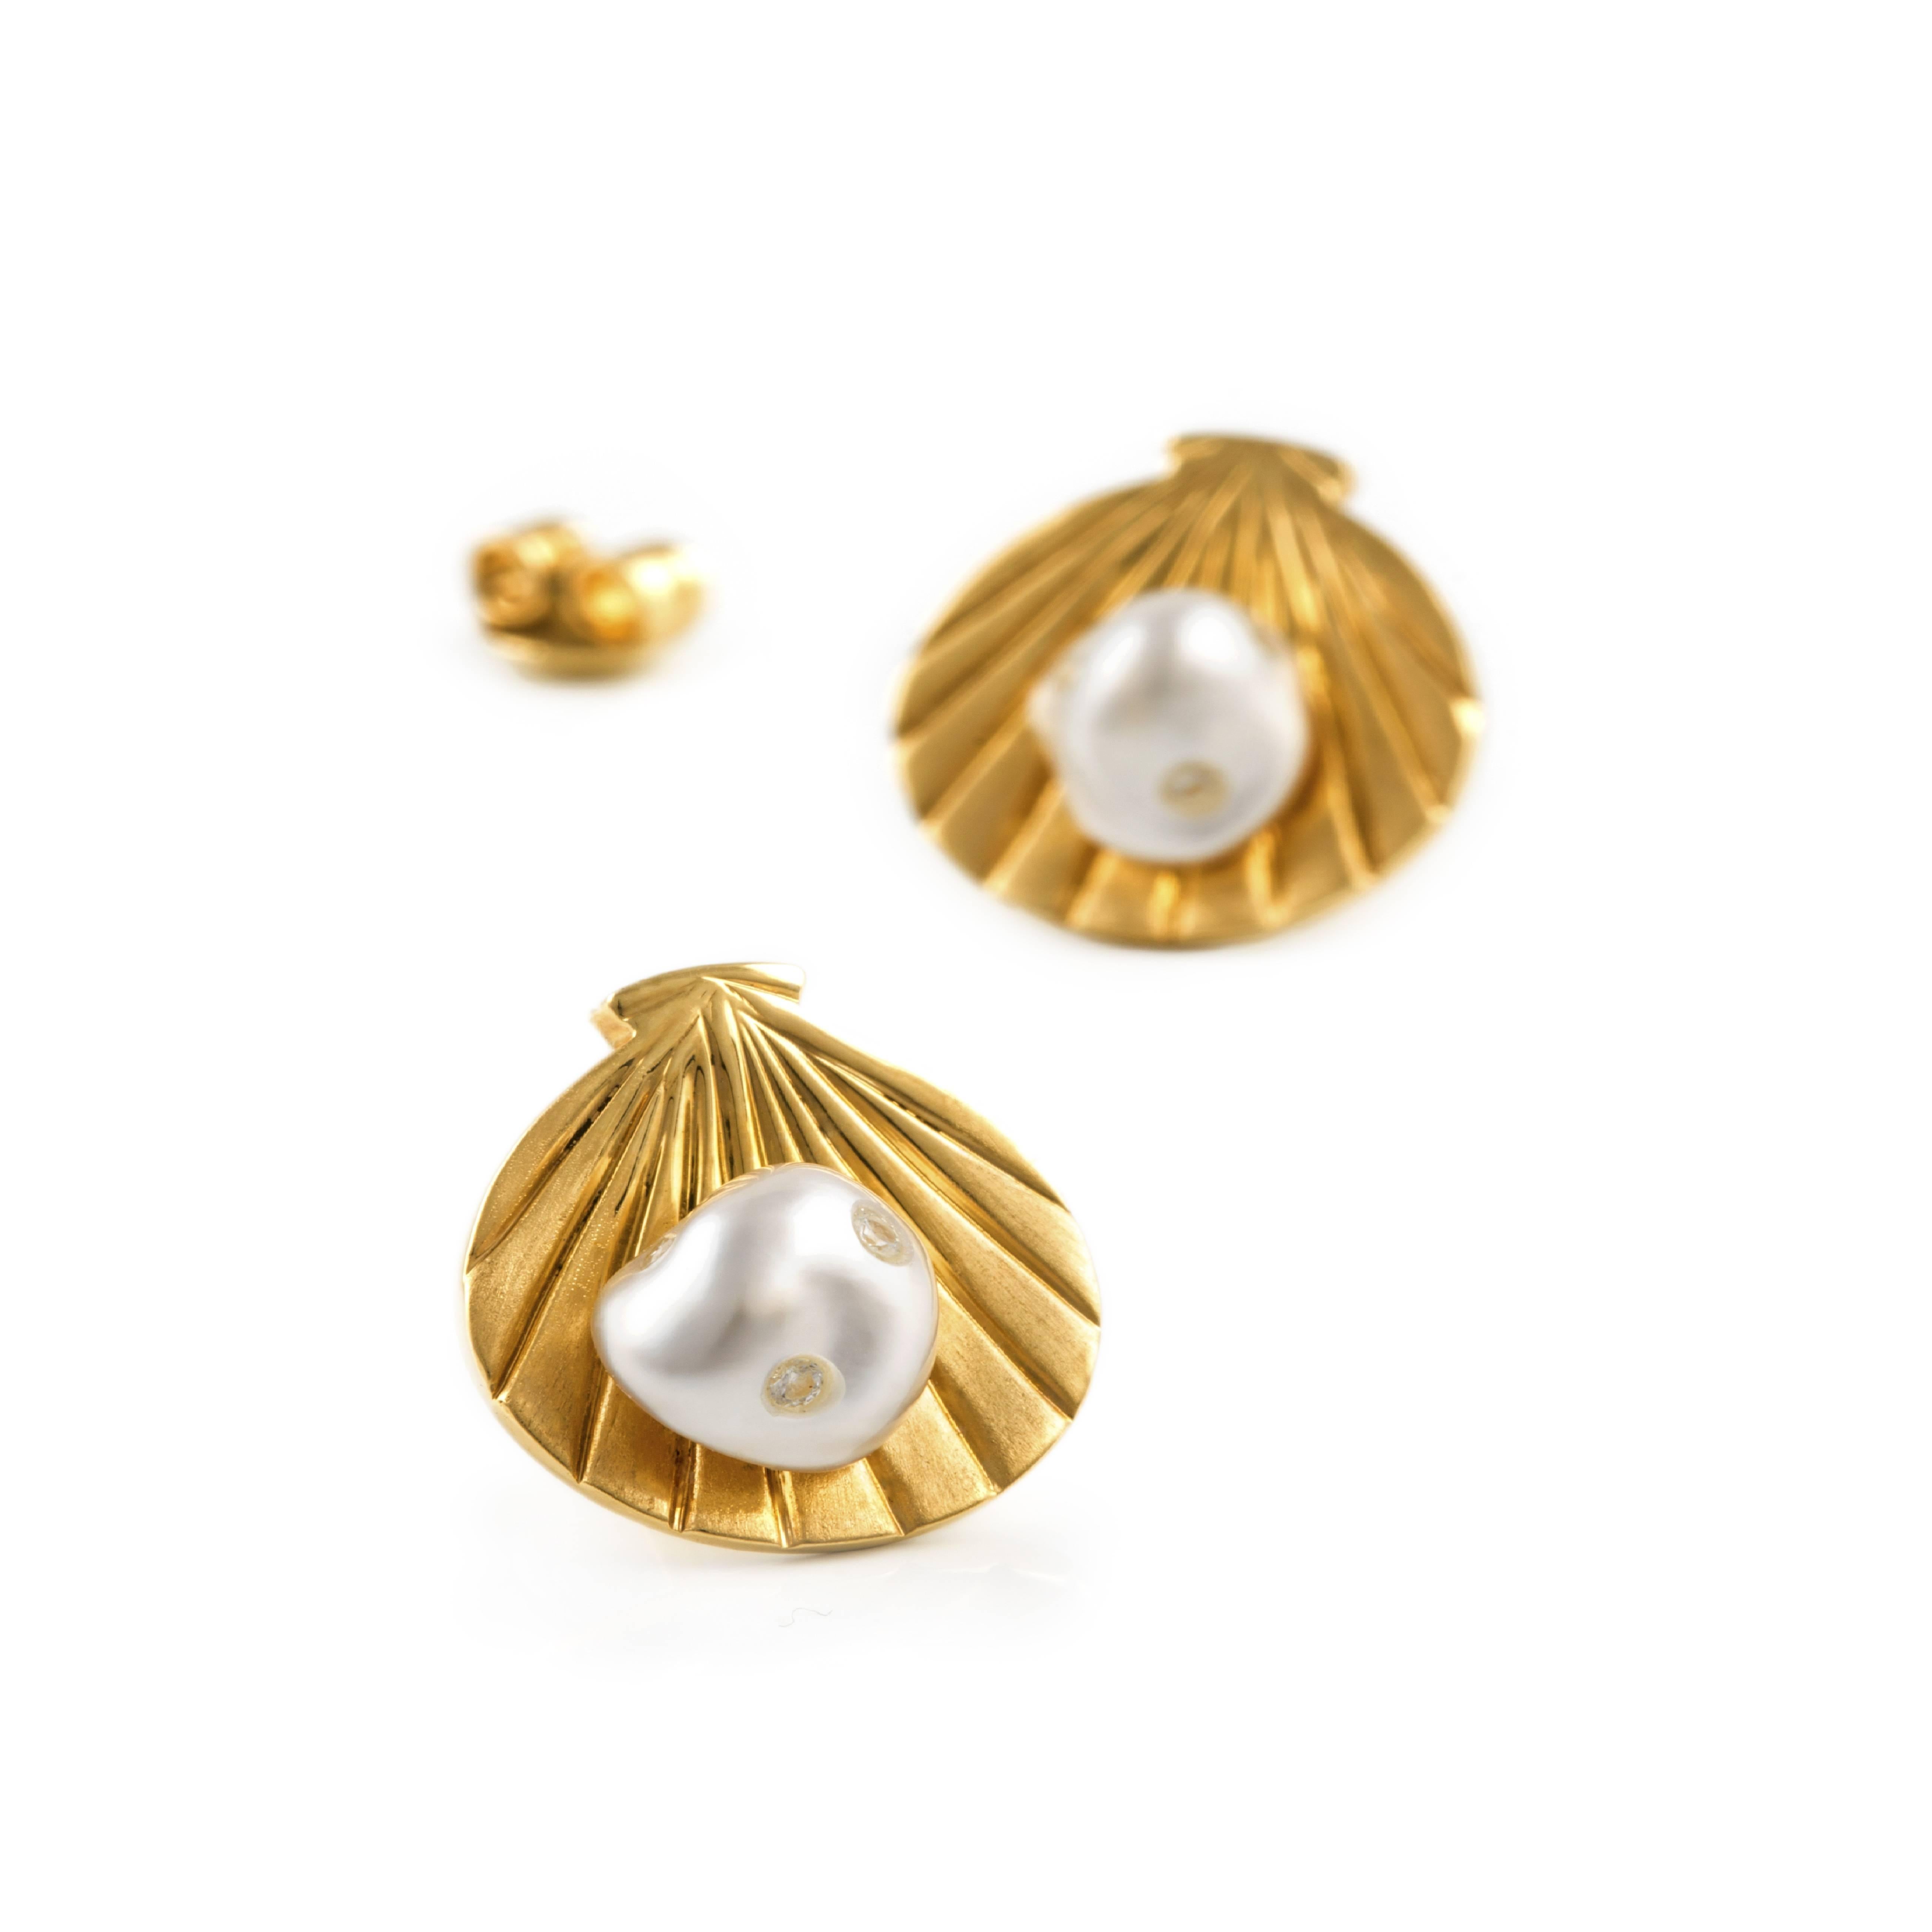 Lust Gold Harvest stud earrings of 18ct yellow gold with soft edged white South Sea keshi pearls of high luster embellished with 0.10 carat brilliant cut white diamonds..

Stunning earrings with a feel of the ocean... 

These earrings are designed